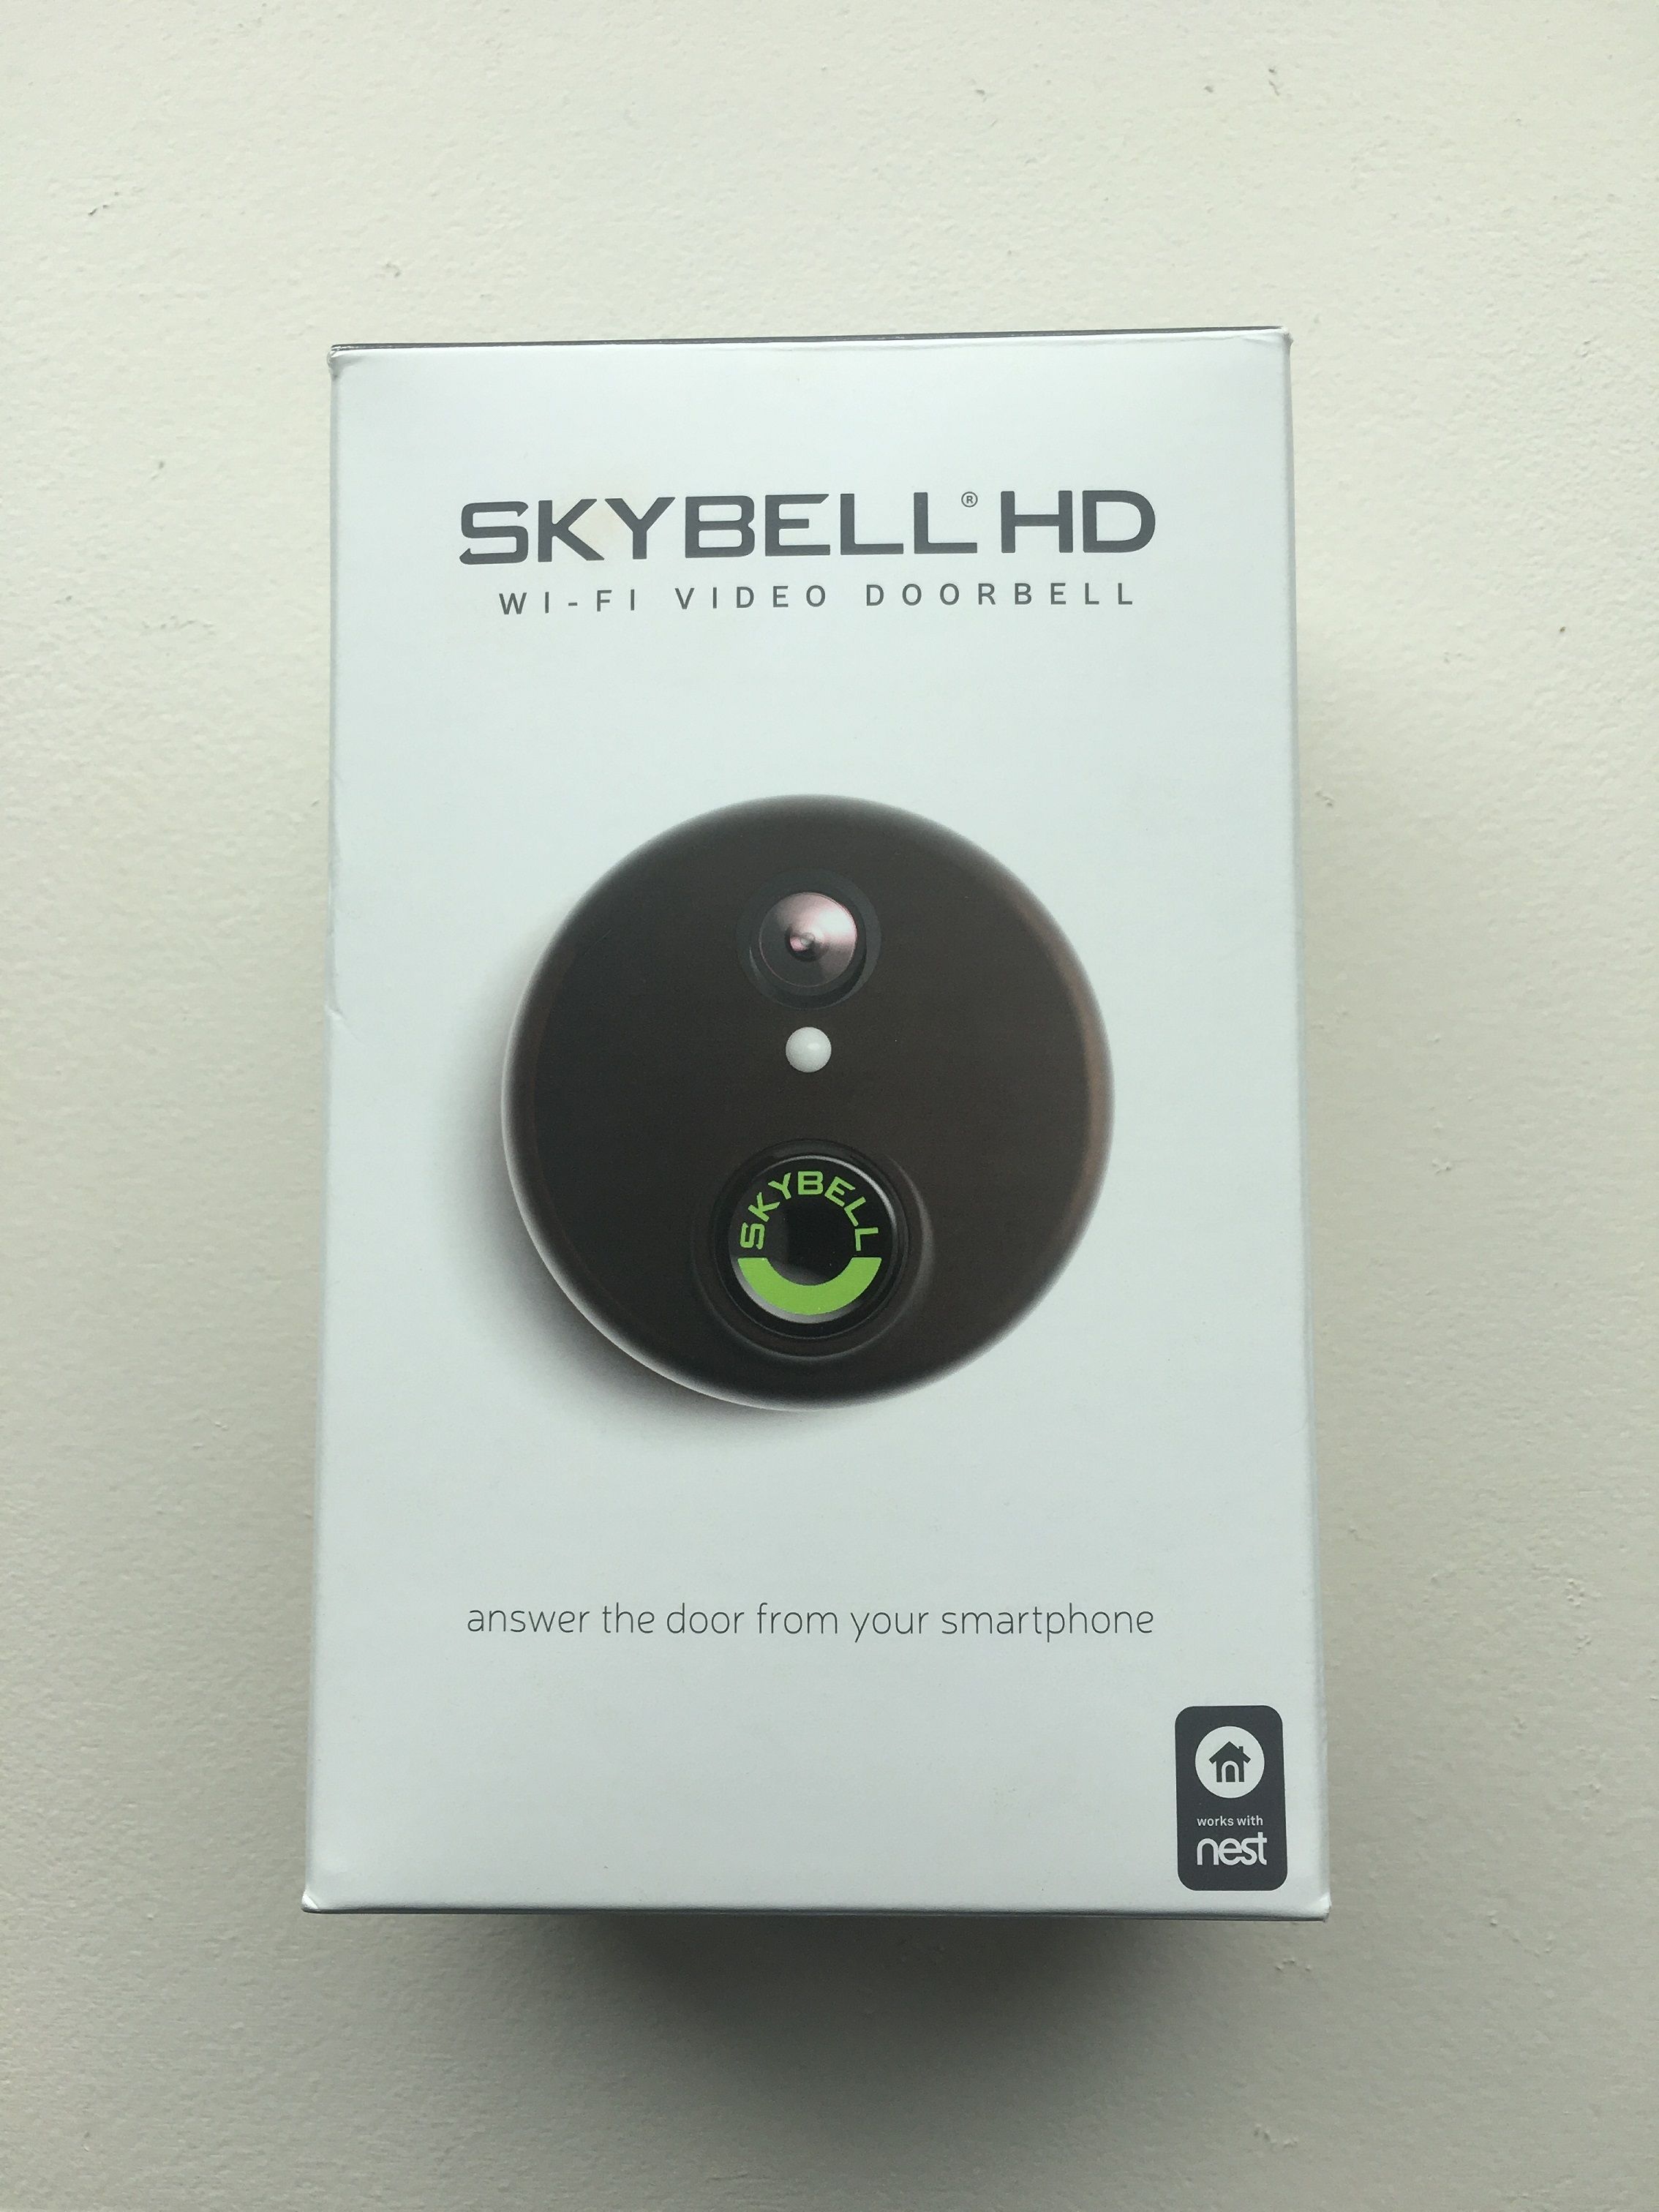 skybell hd night vision